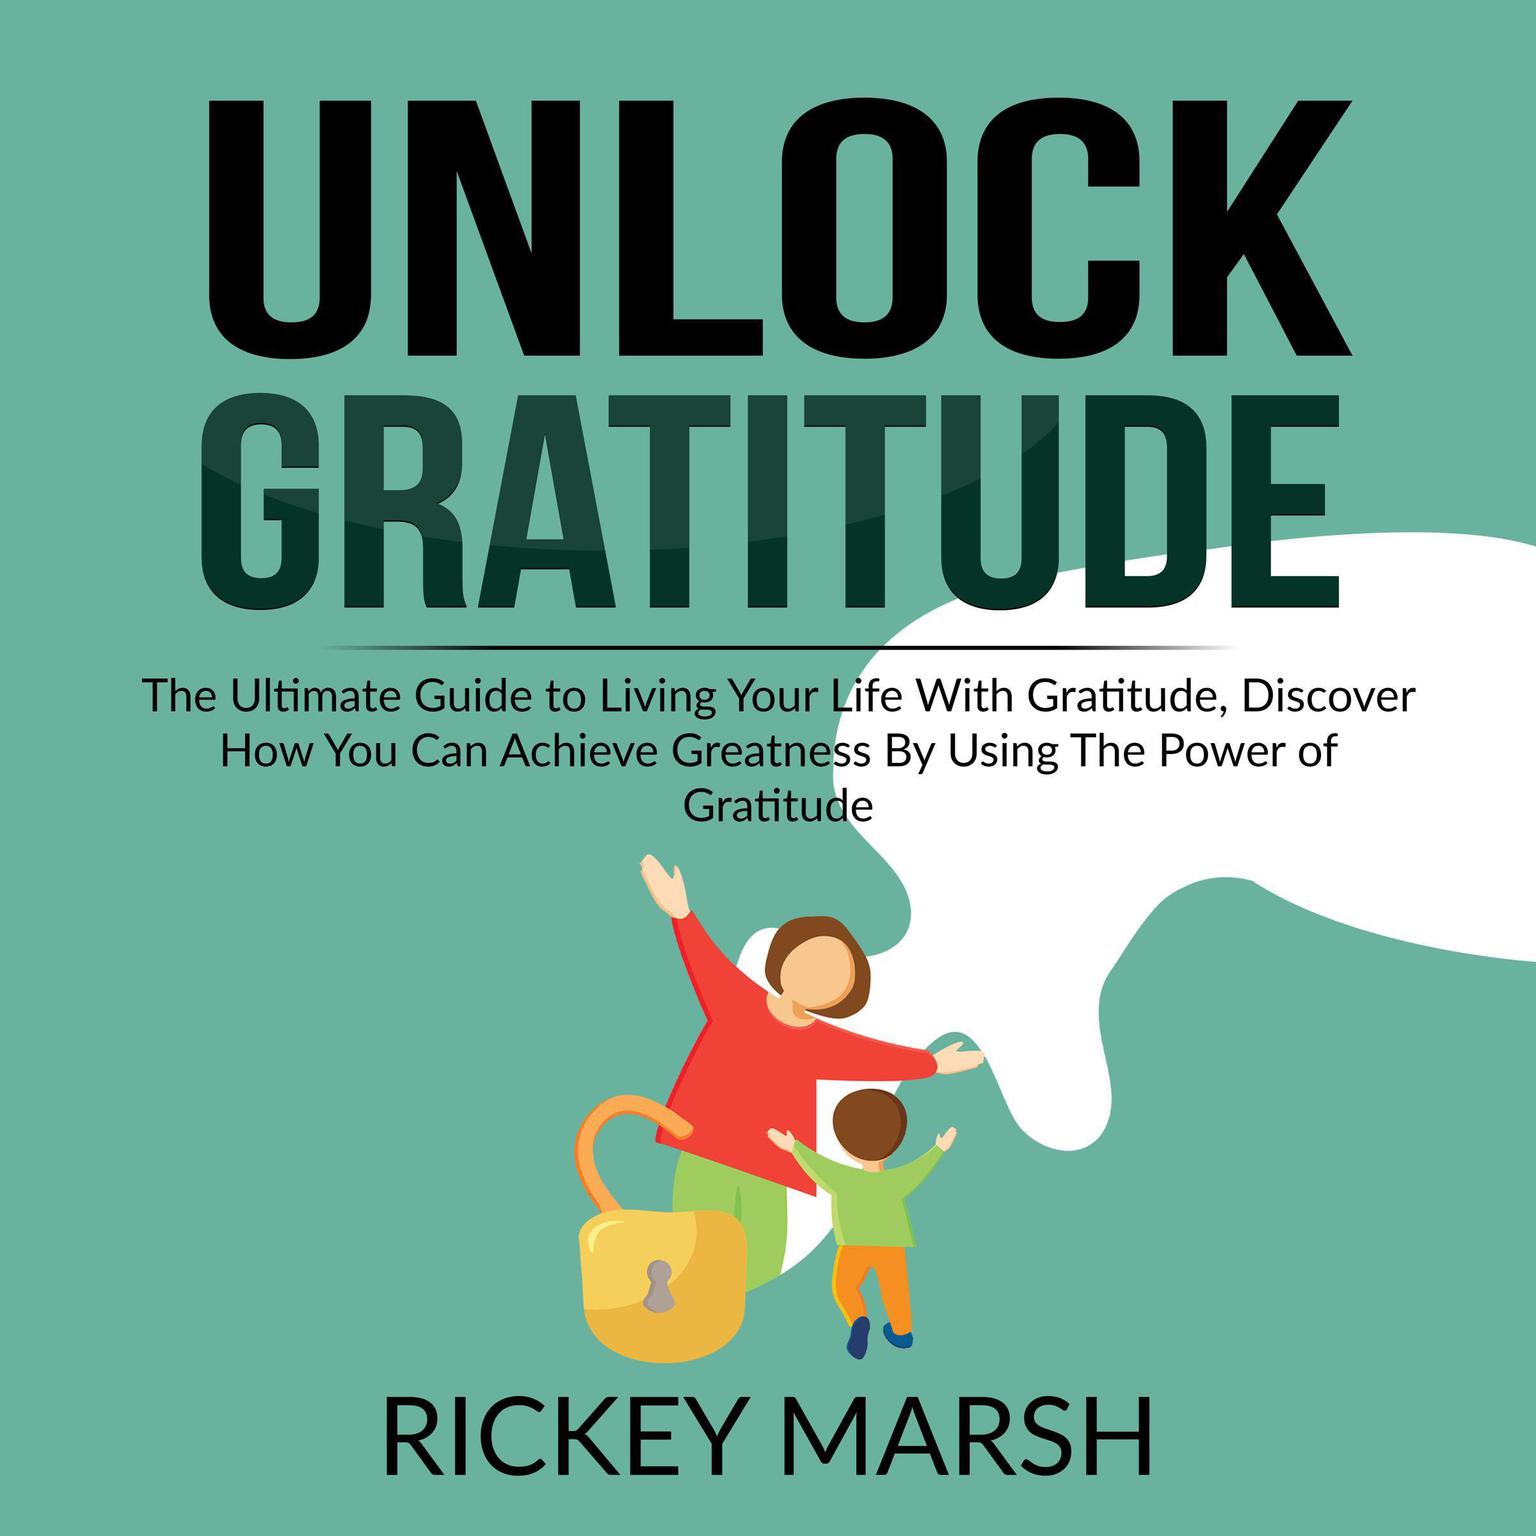 Unlock Gratitude: The Ultimate Guide to Living Your Life With Gratitude, Discover How You Can Achieve Greatness By Using The Power of Gratitude Audiobook, by Rickey Marsh